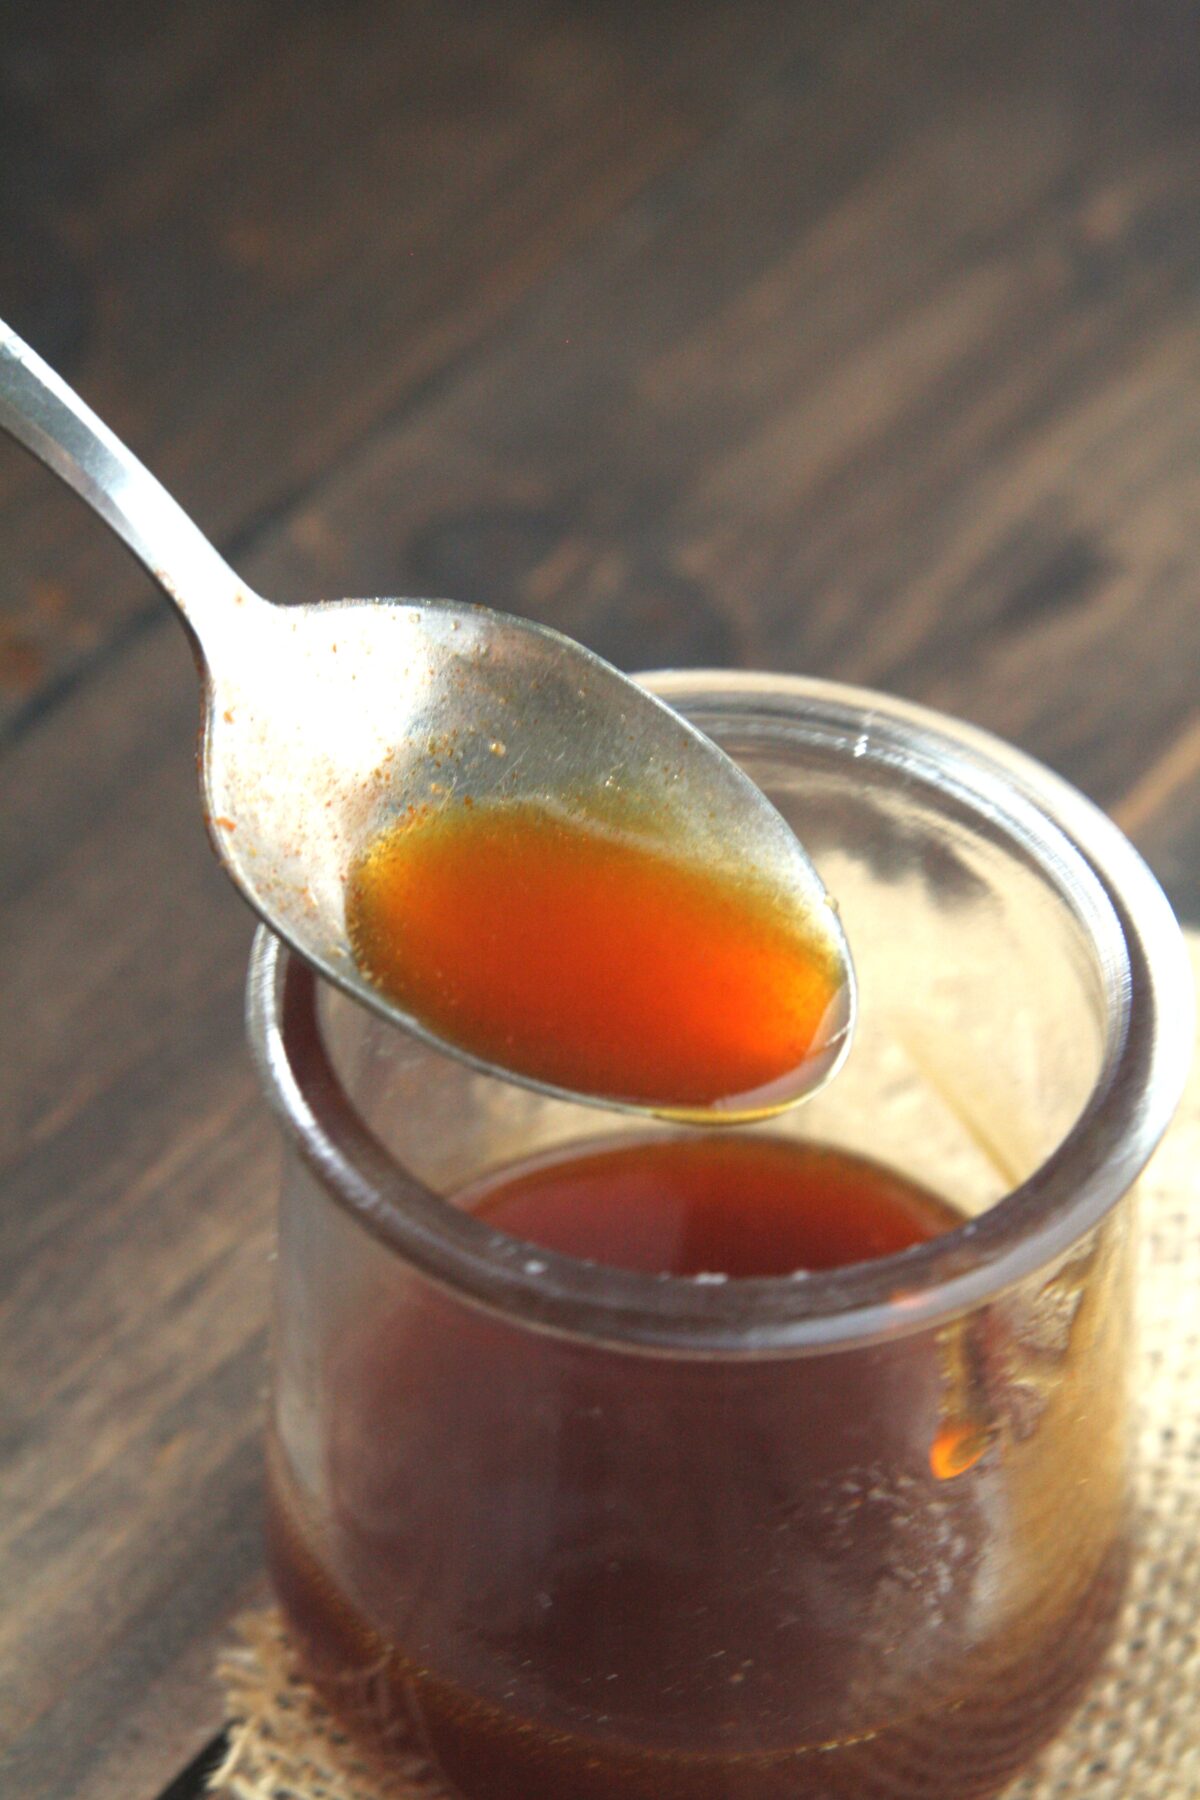 Create your own version of Mike's Hot Honey recipe with just two ingredients and check out some creative ways to incorporate this sweet and spicy condiment into your favorite dishes.